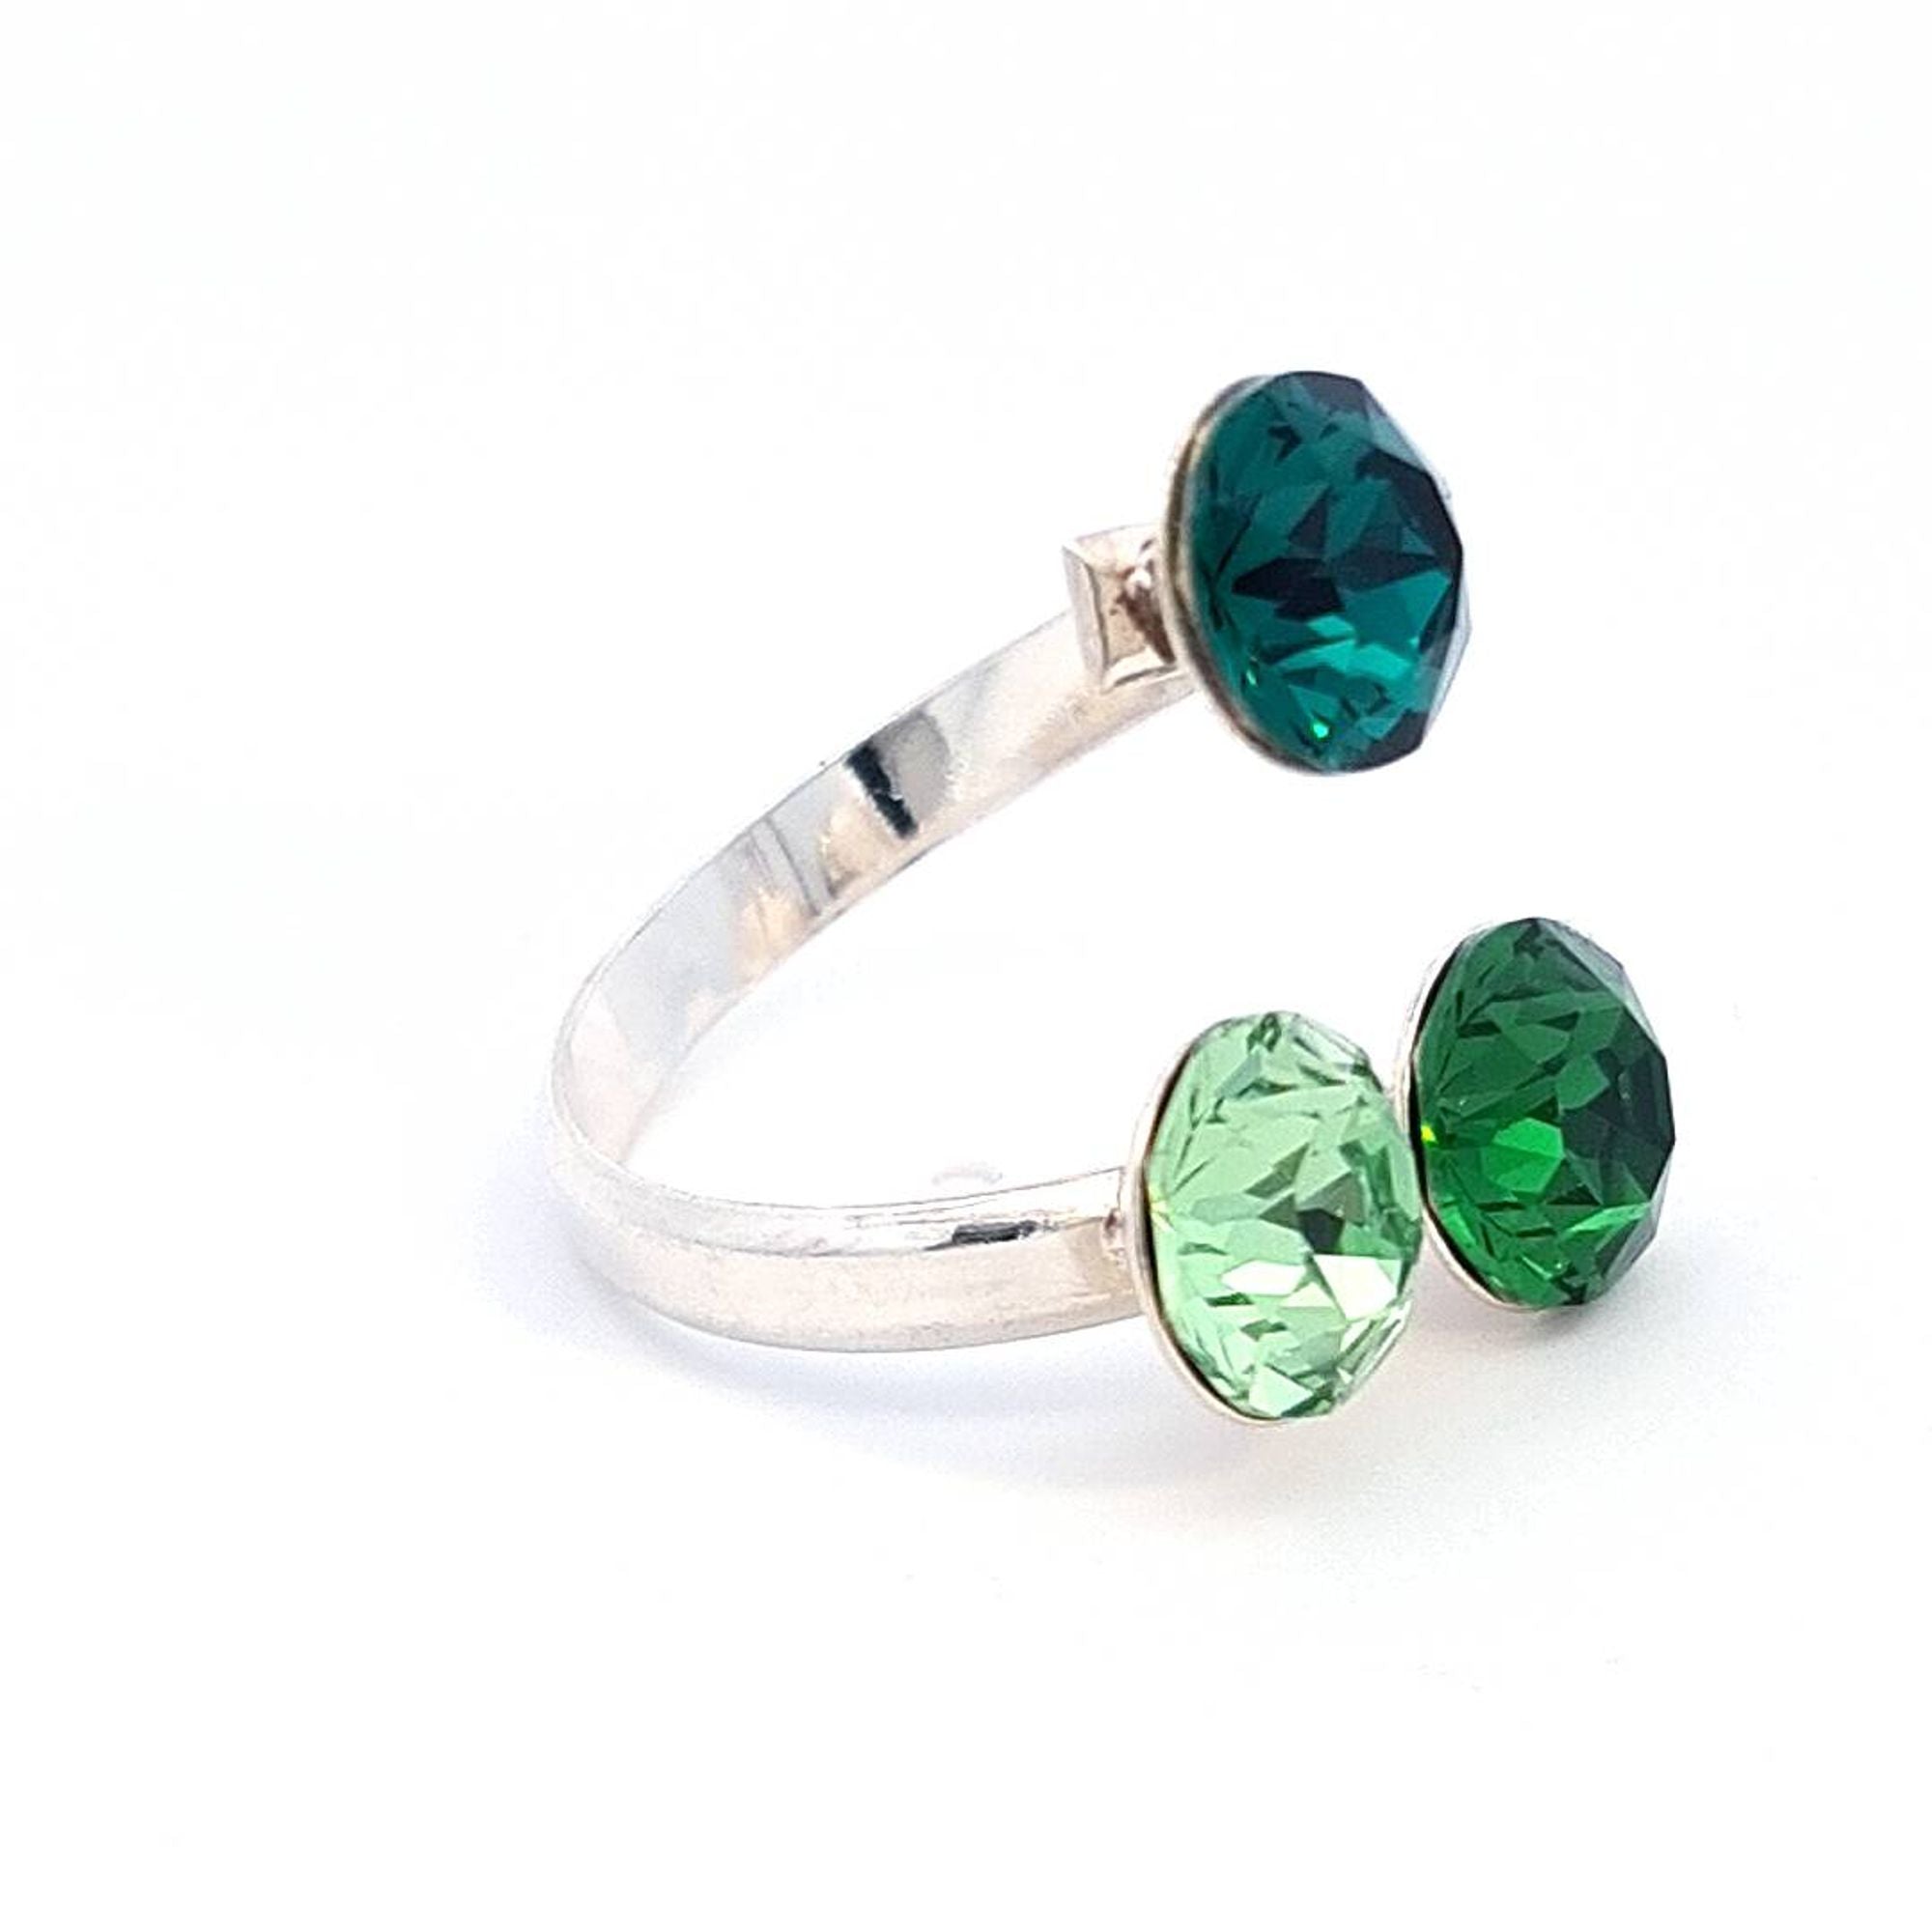 Magpie Gems Triad Treasure Cluster Ring with Luminous Emerald Green Crystals, side view